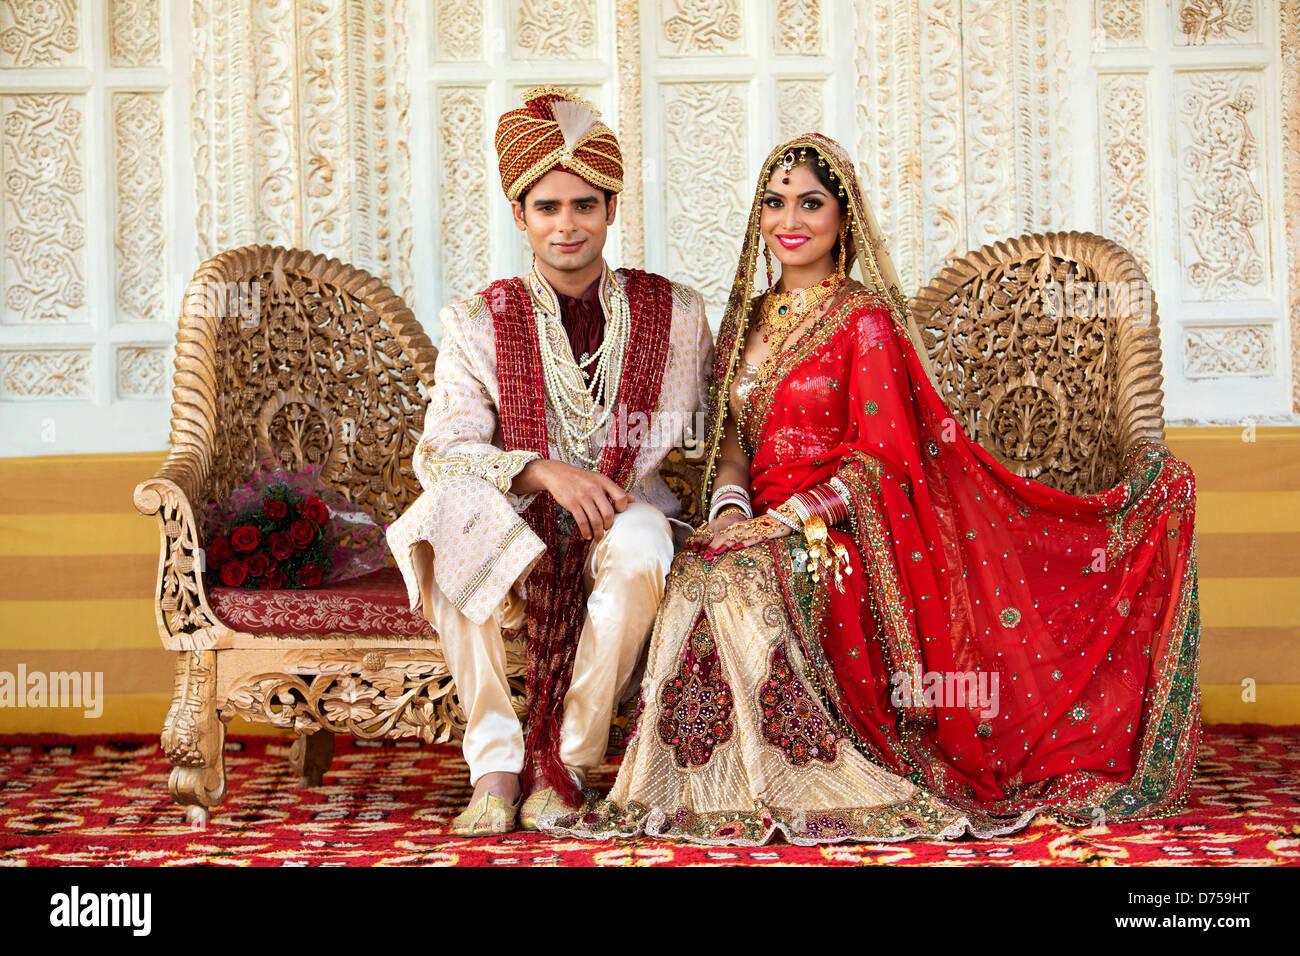 Indian Bride And Groom In Traditional Wedding Dress Sitting On A